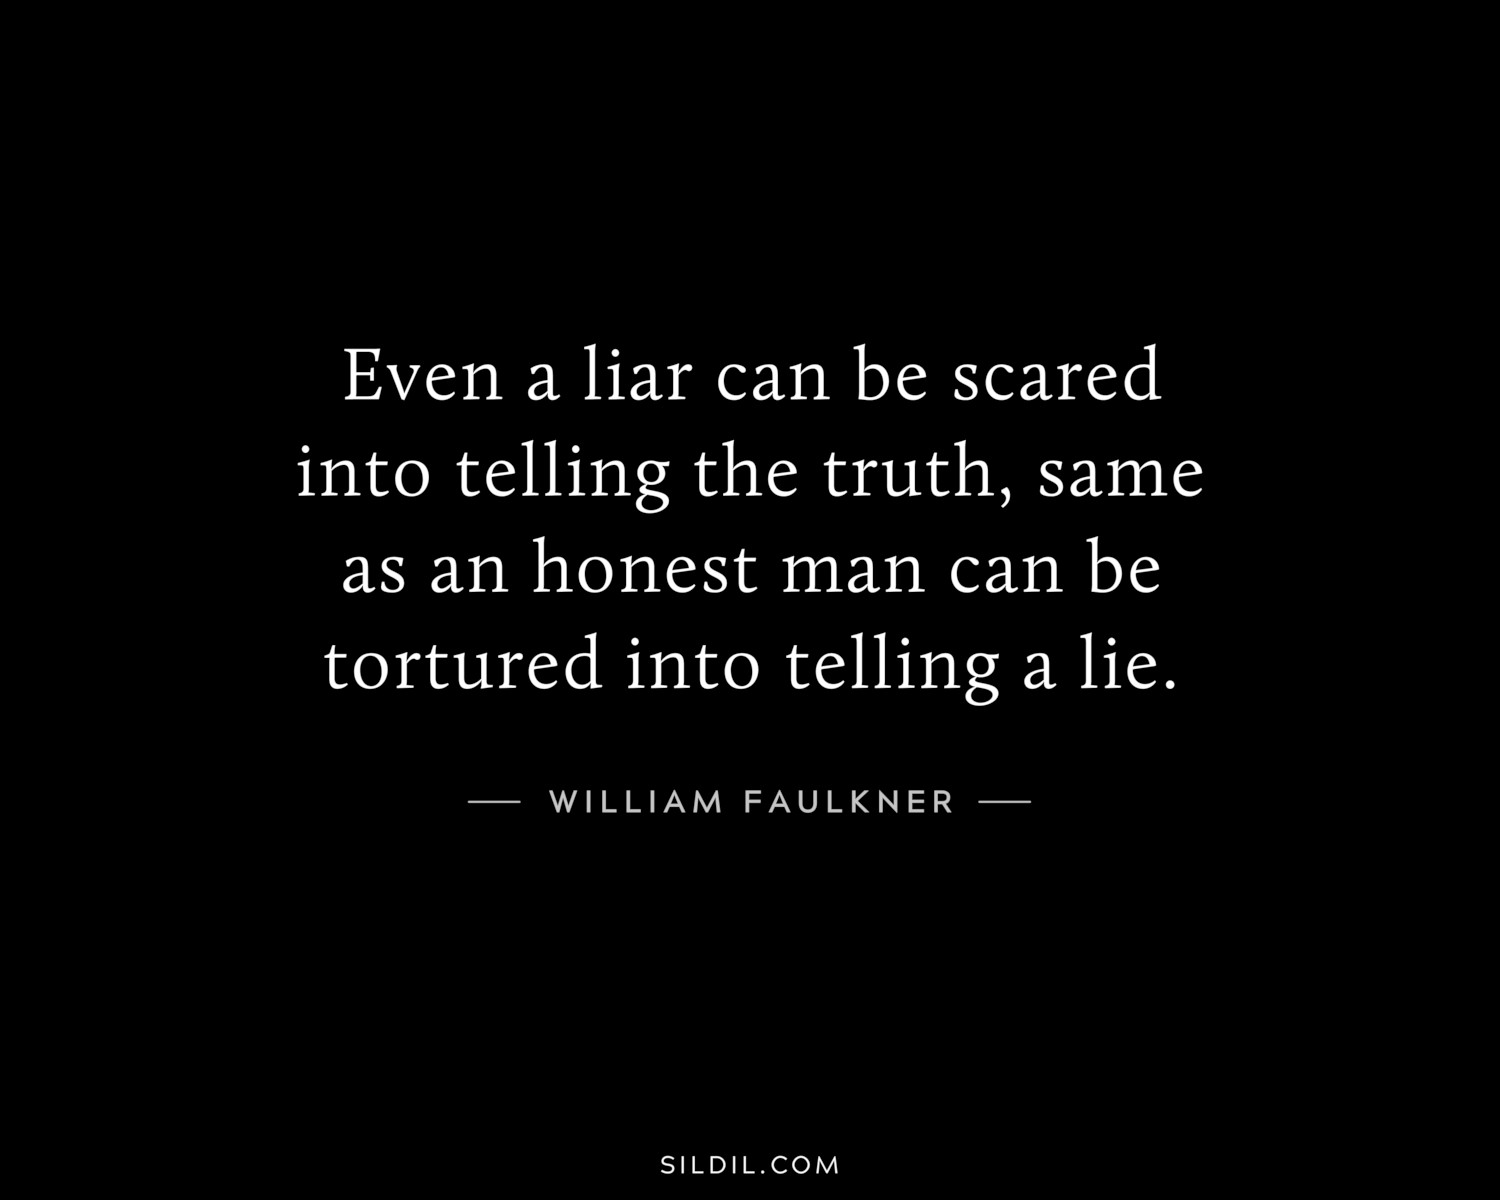 Even a liar can be scared into telling the truth, same as an honest man can be tortured into telling a lie.